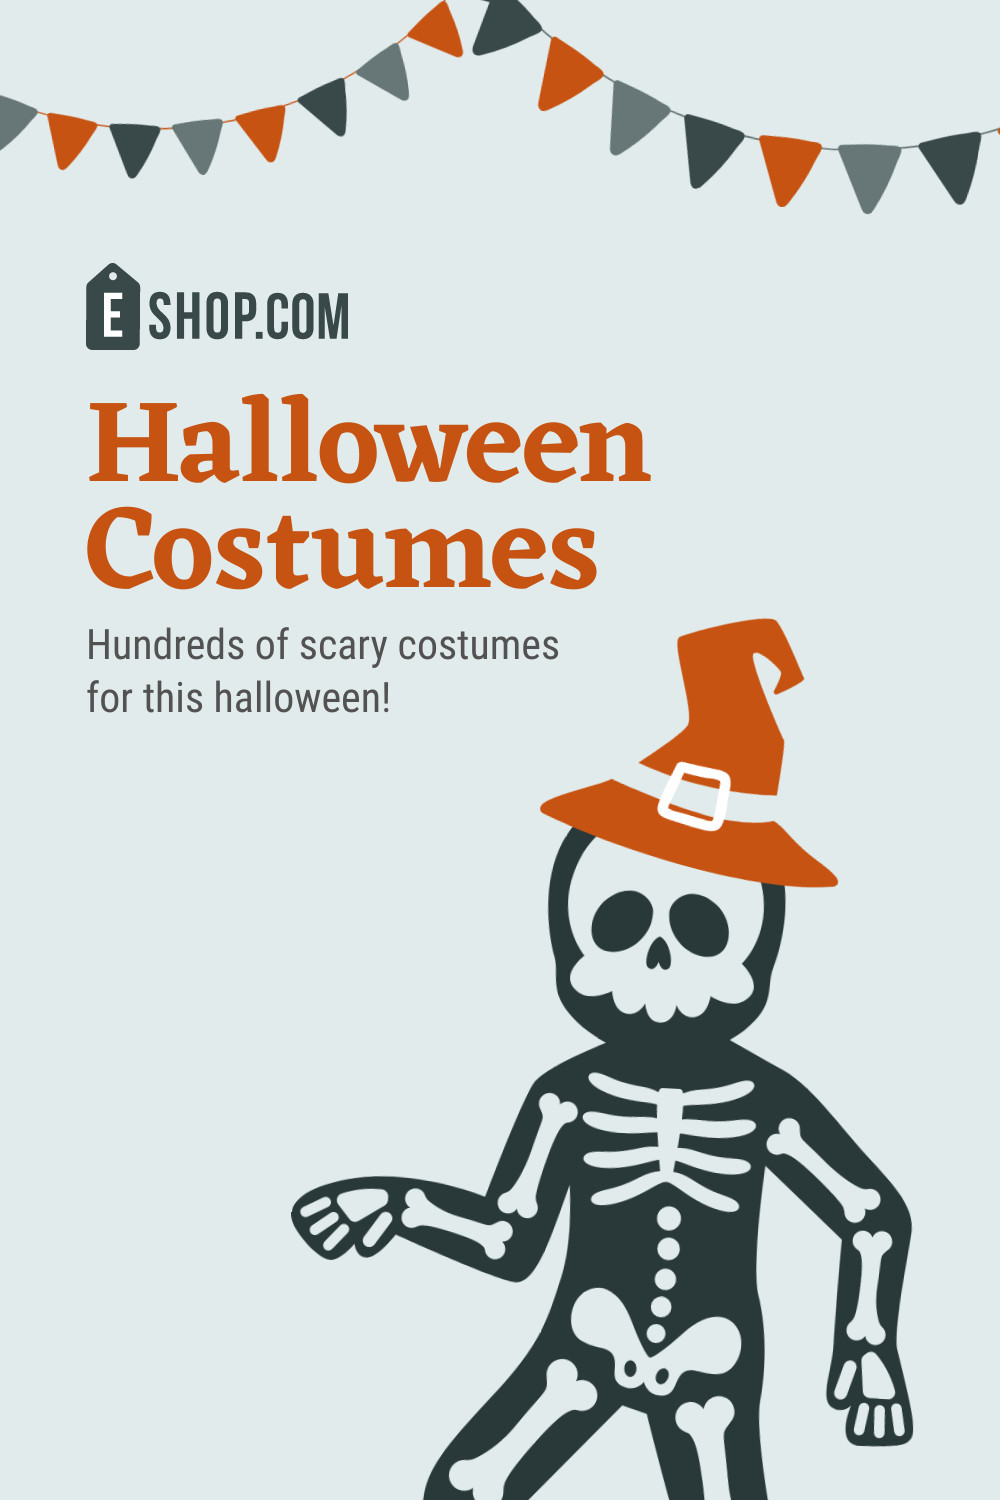 Hundreds of Scary Halloween Costumes Inline Rectangle 300x250